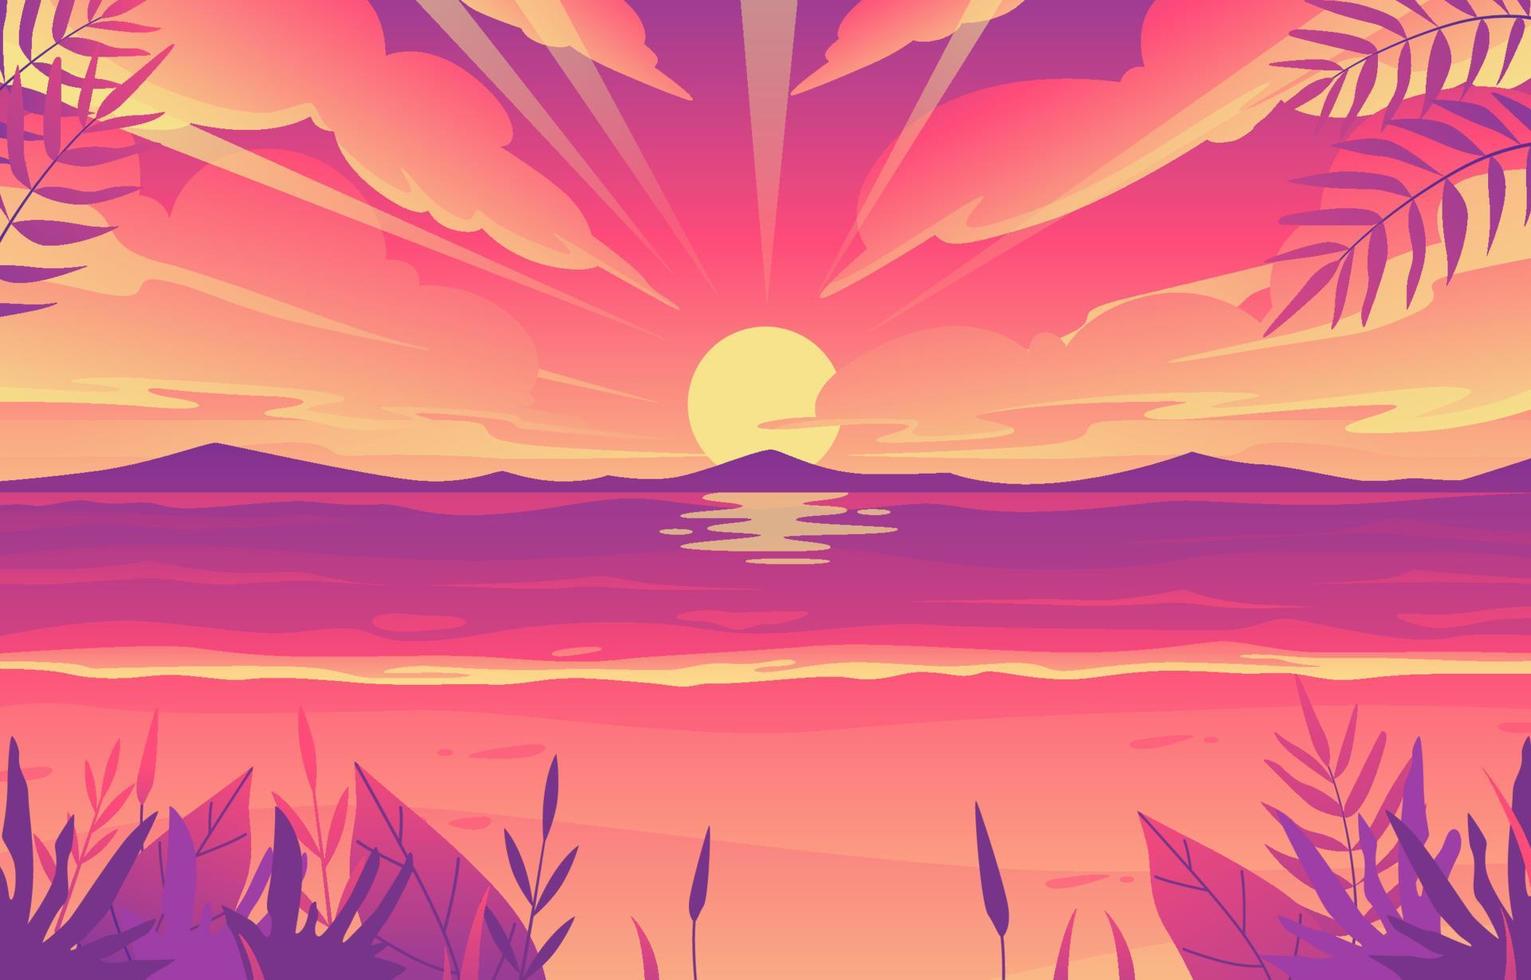 Beach Scenery While Sunset vector